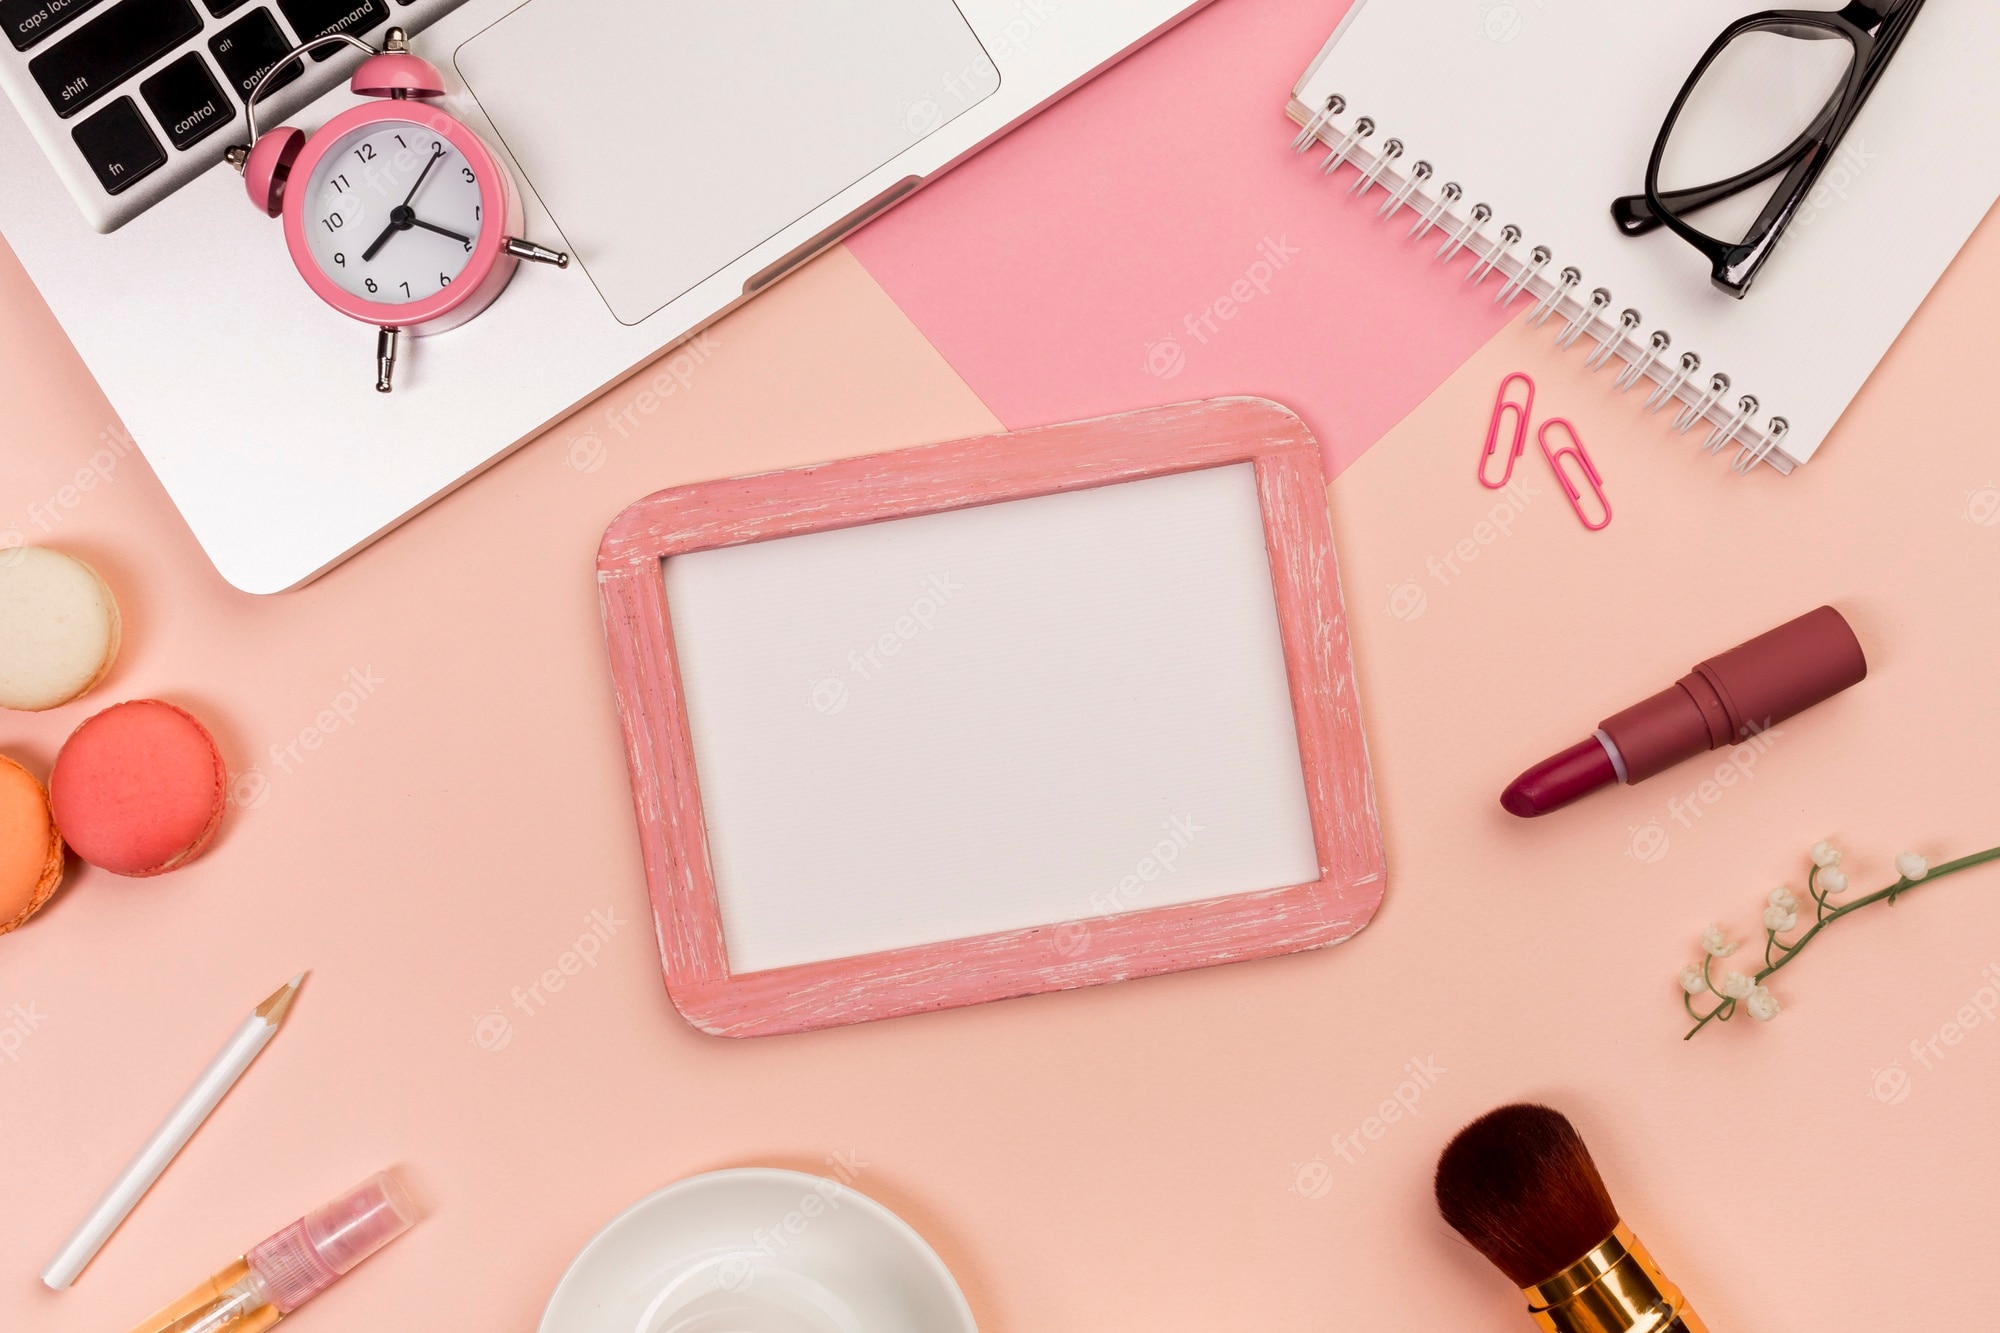 Free Photo. Alarm clock on laptop with makeup brush, macaroons, whiteboard slate on colored background